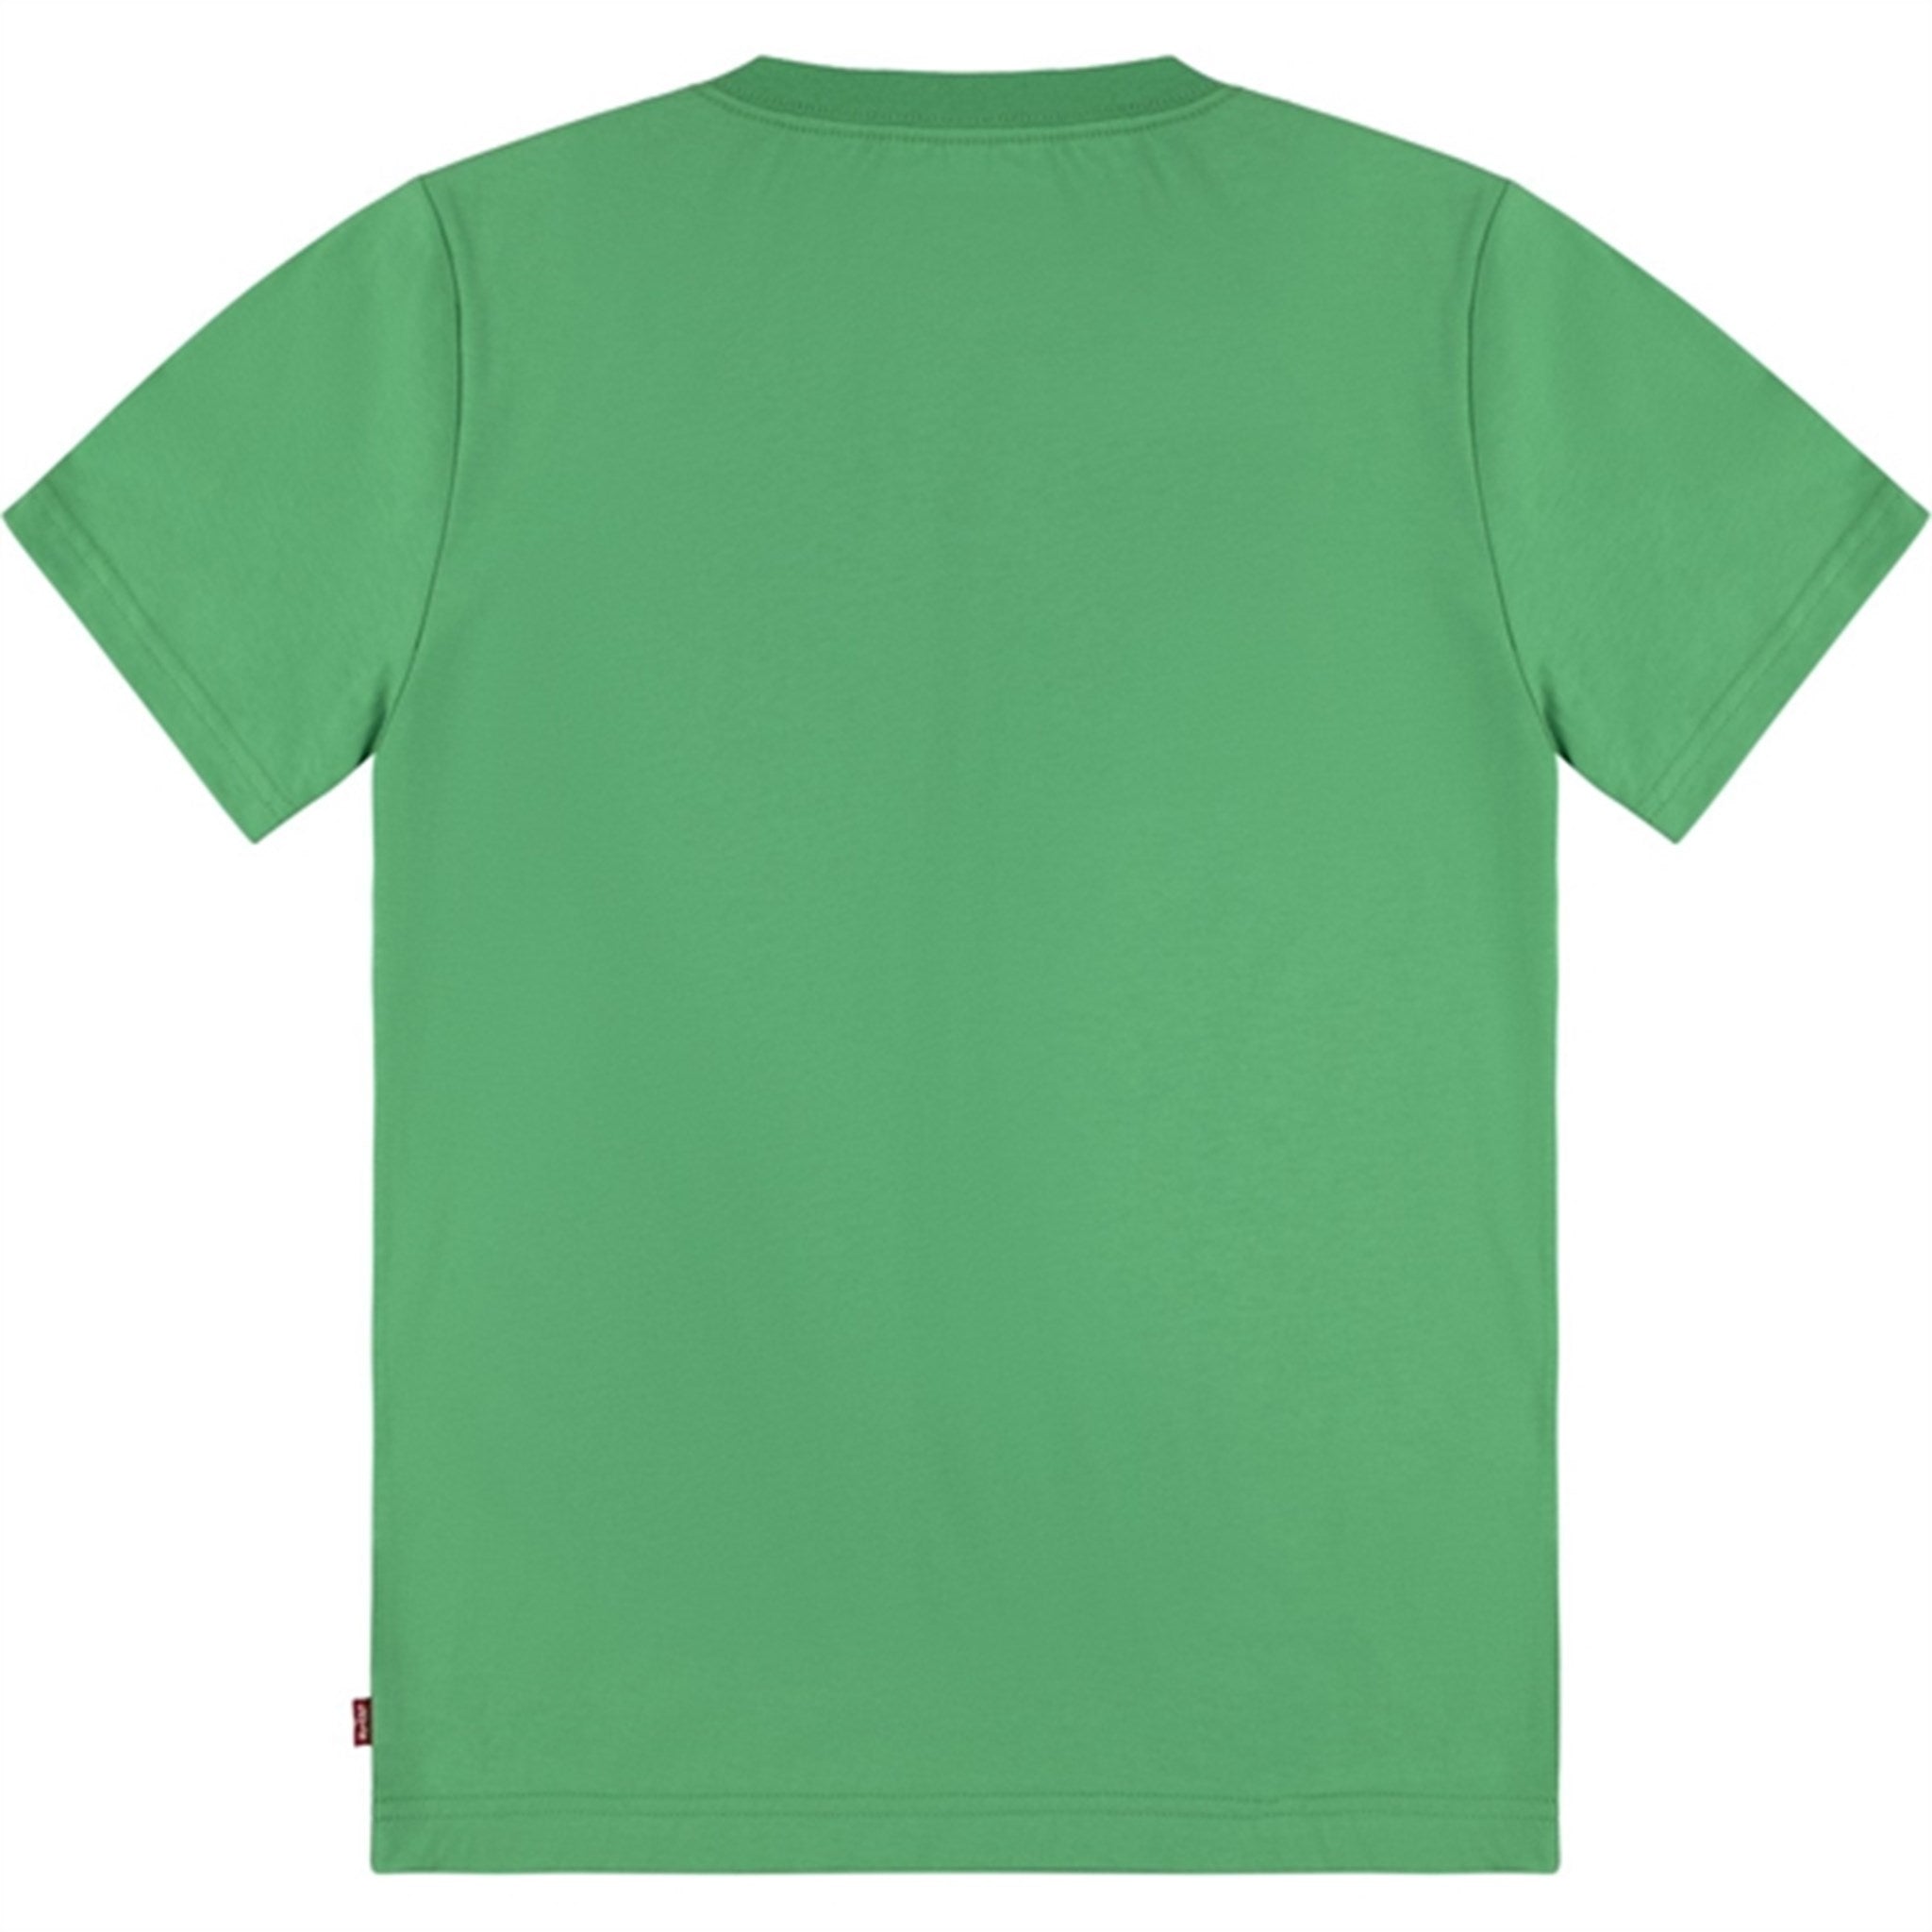 Levi's Graphic Batwing T-Shirt Bright Green 4